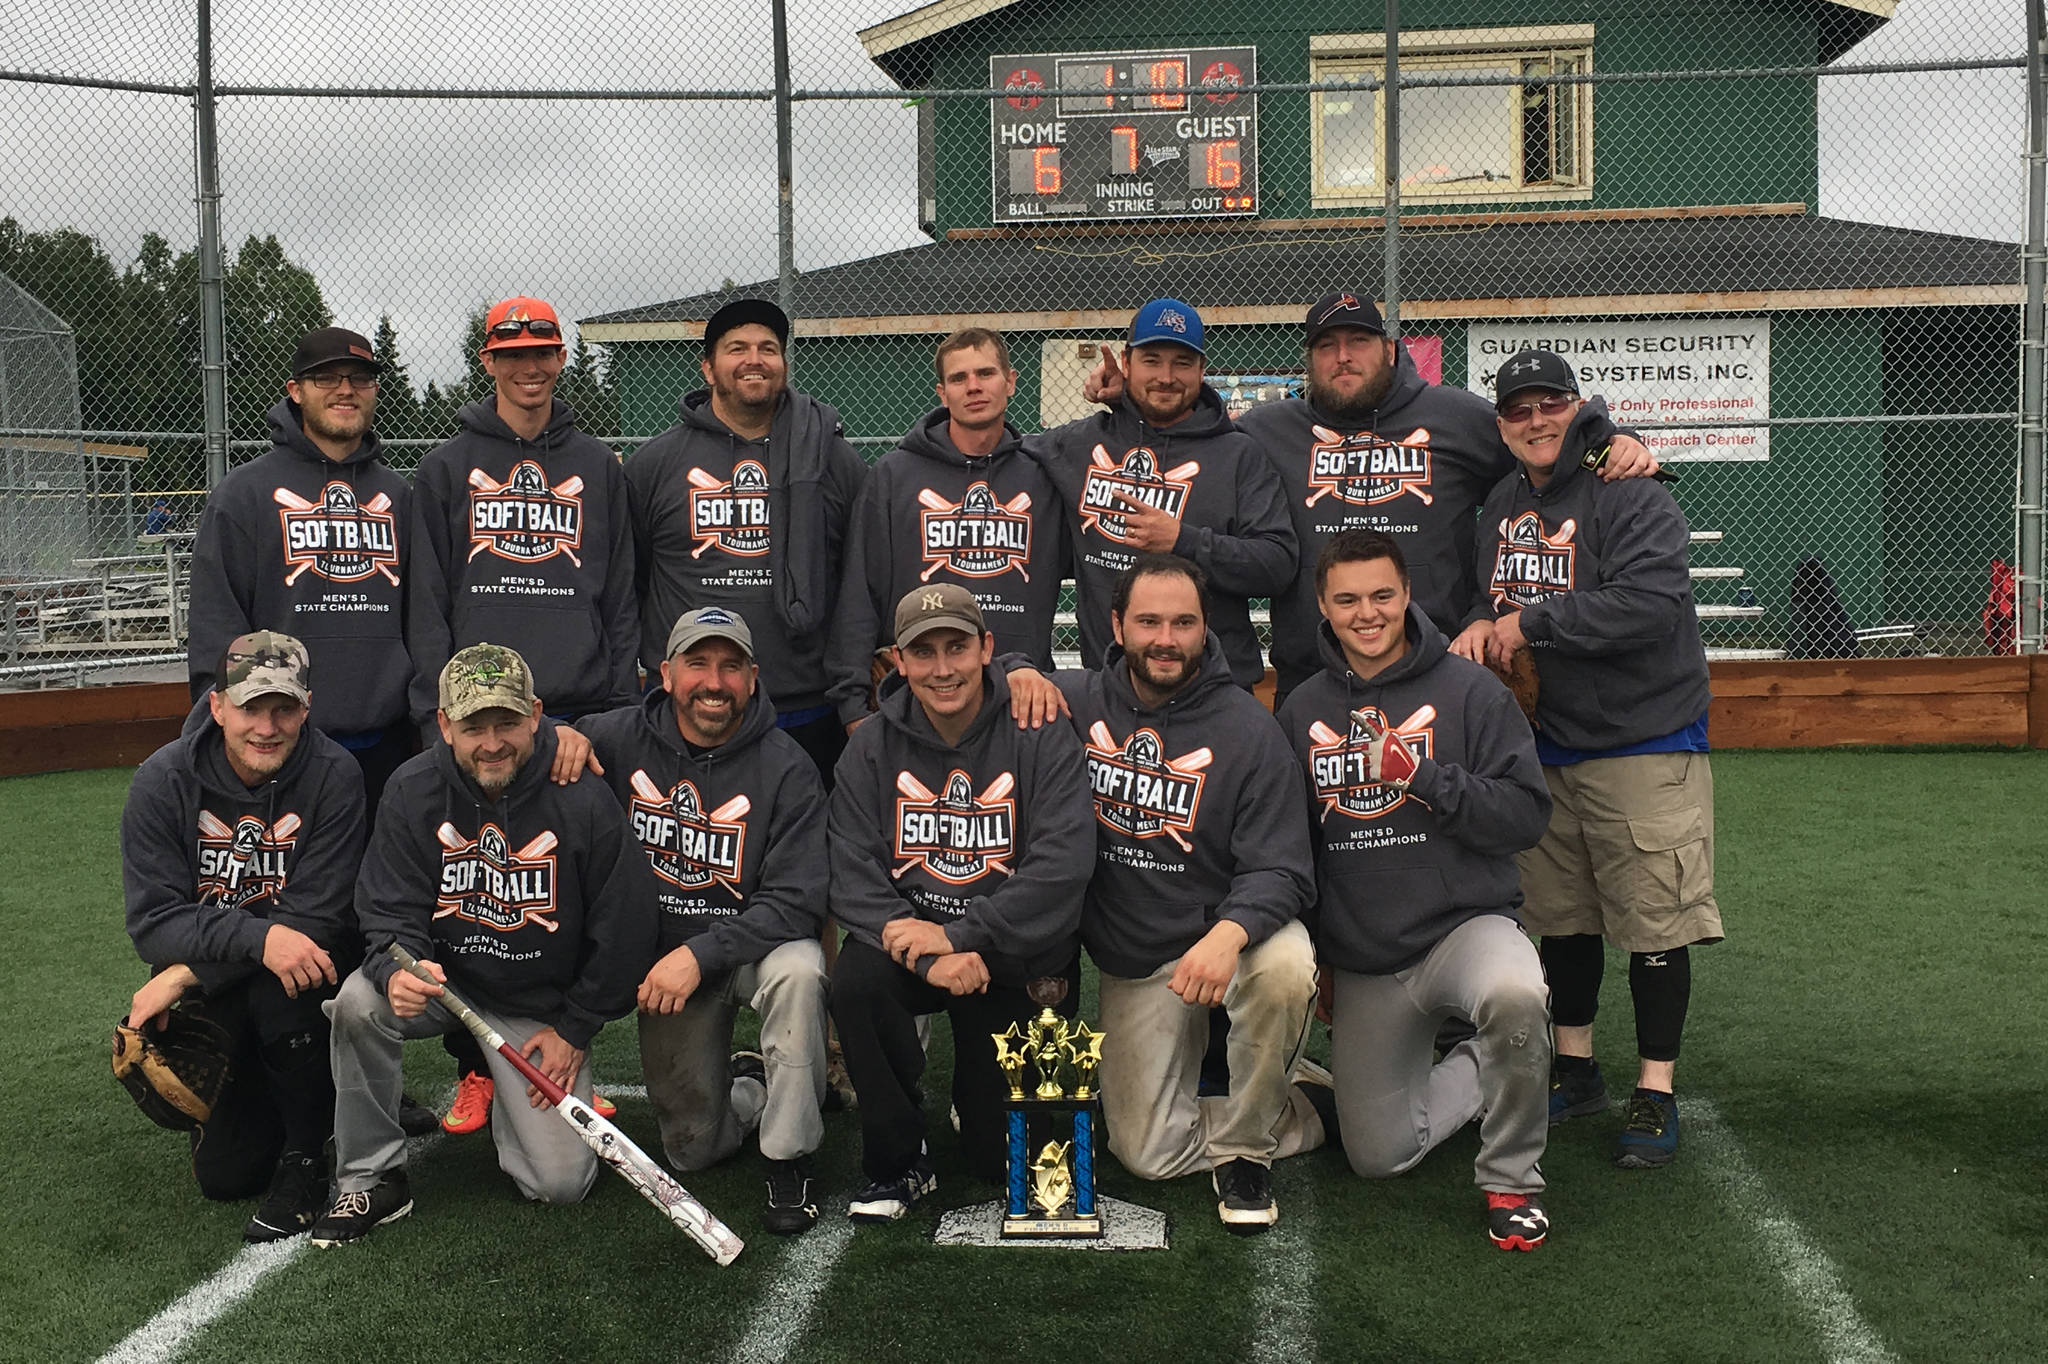 <span class="neFMT neFMT_PhotoCredit">Photo provided</span>                                The Homer men’s softball team Best Western poses after winning the Men’s Division D State Tournament in Anchorage. Back, from left to right: Sam Buenting, Patrick Cashman, Robert Toner, Brandon Bertsch, Danny Stanislaw, Trey Taylor and Heath Smith. Front, left to right: Phillip Jones, Doug Johnson, Joel Pietsch, Tim Hatfield, Kenny Ciccoli, Travis Smith.